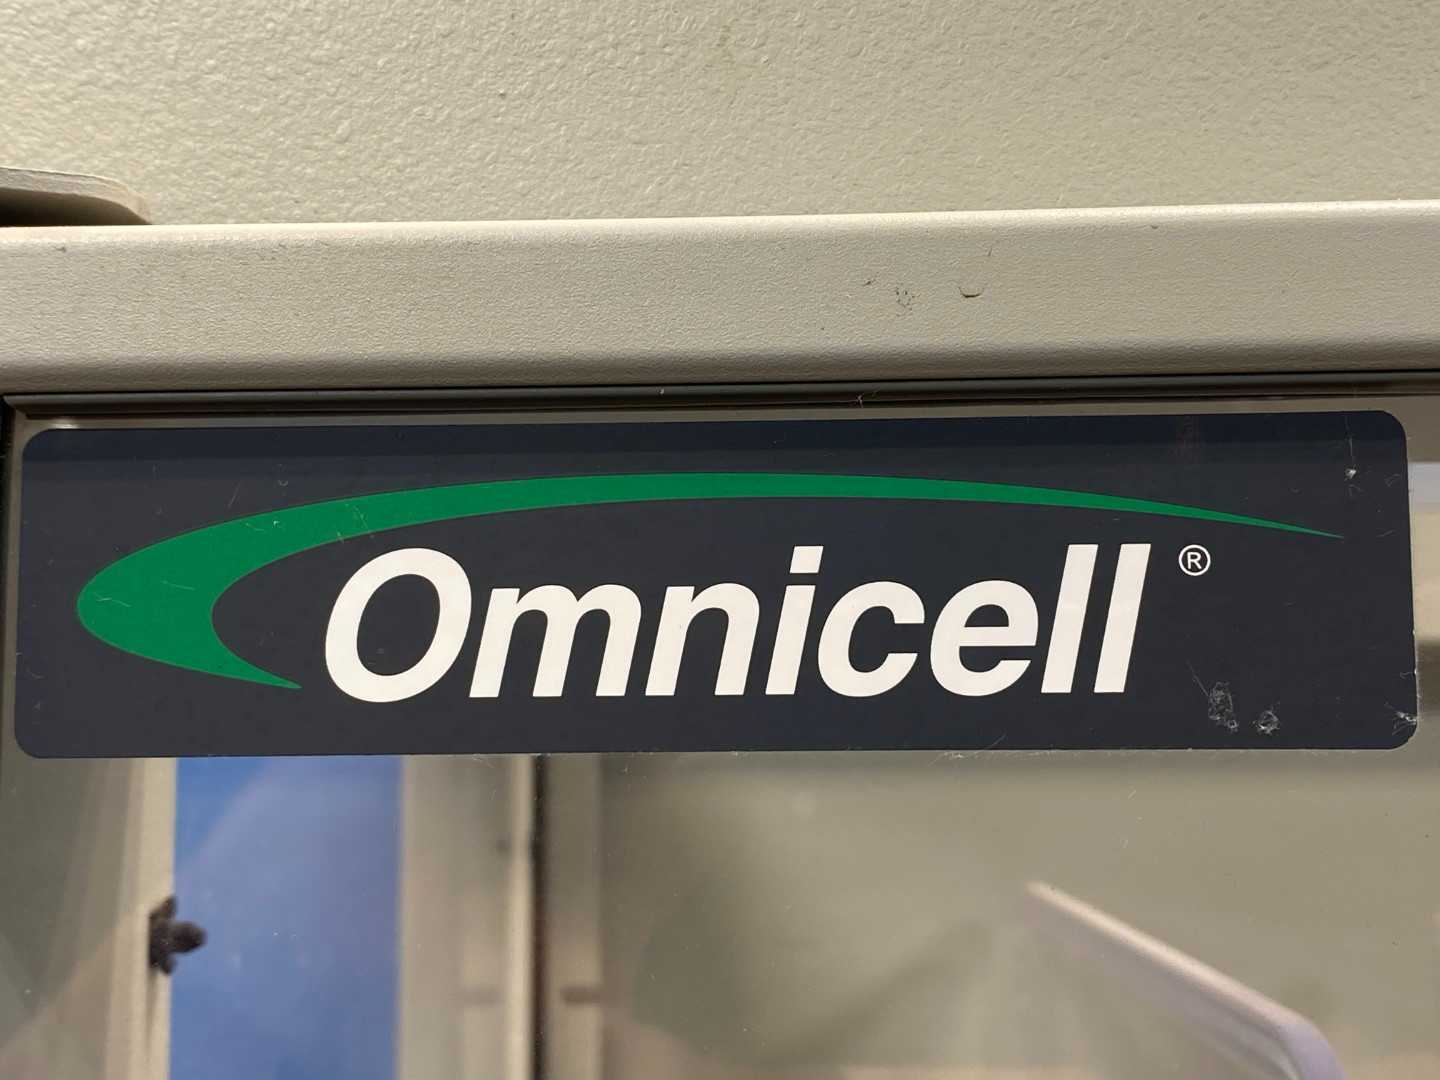 OmniCell 2 Cell 224 OmniSupplier No HDD, No AC cable (Left Rail stuck)